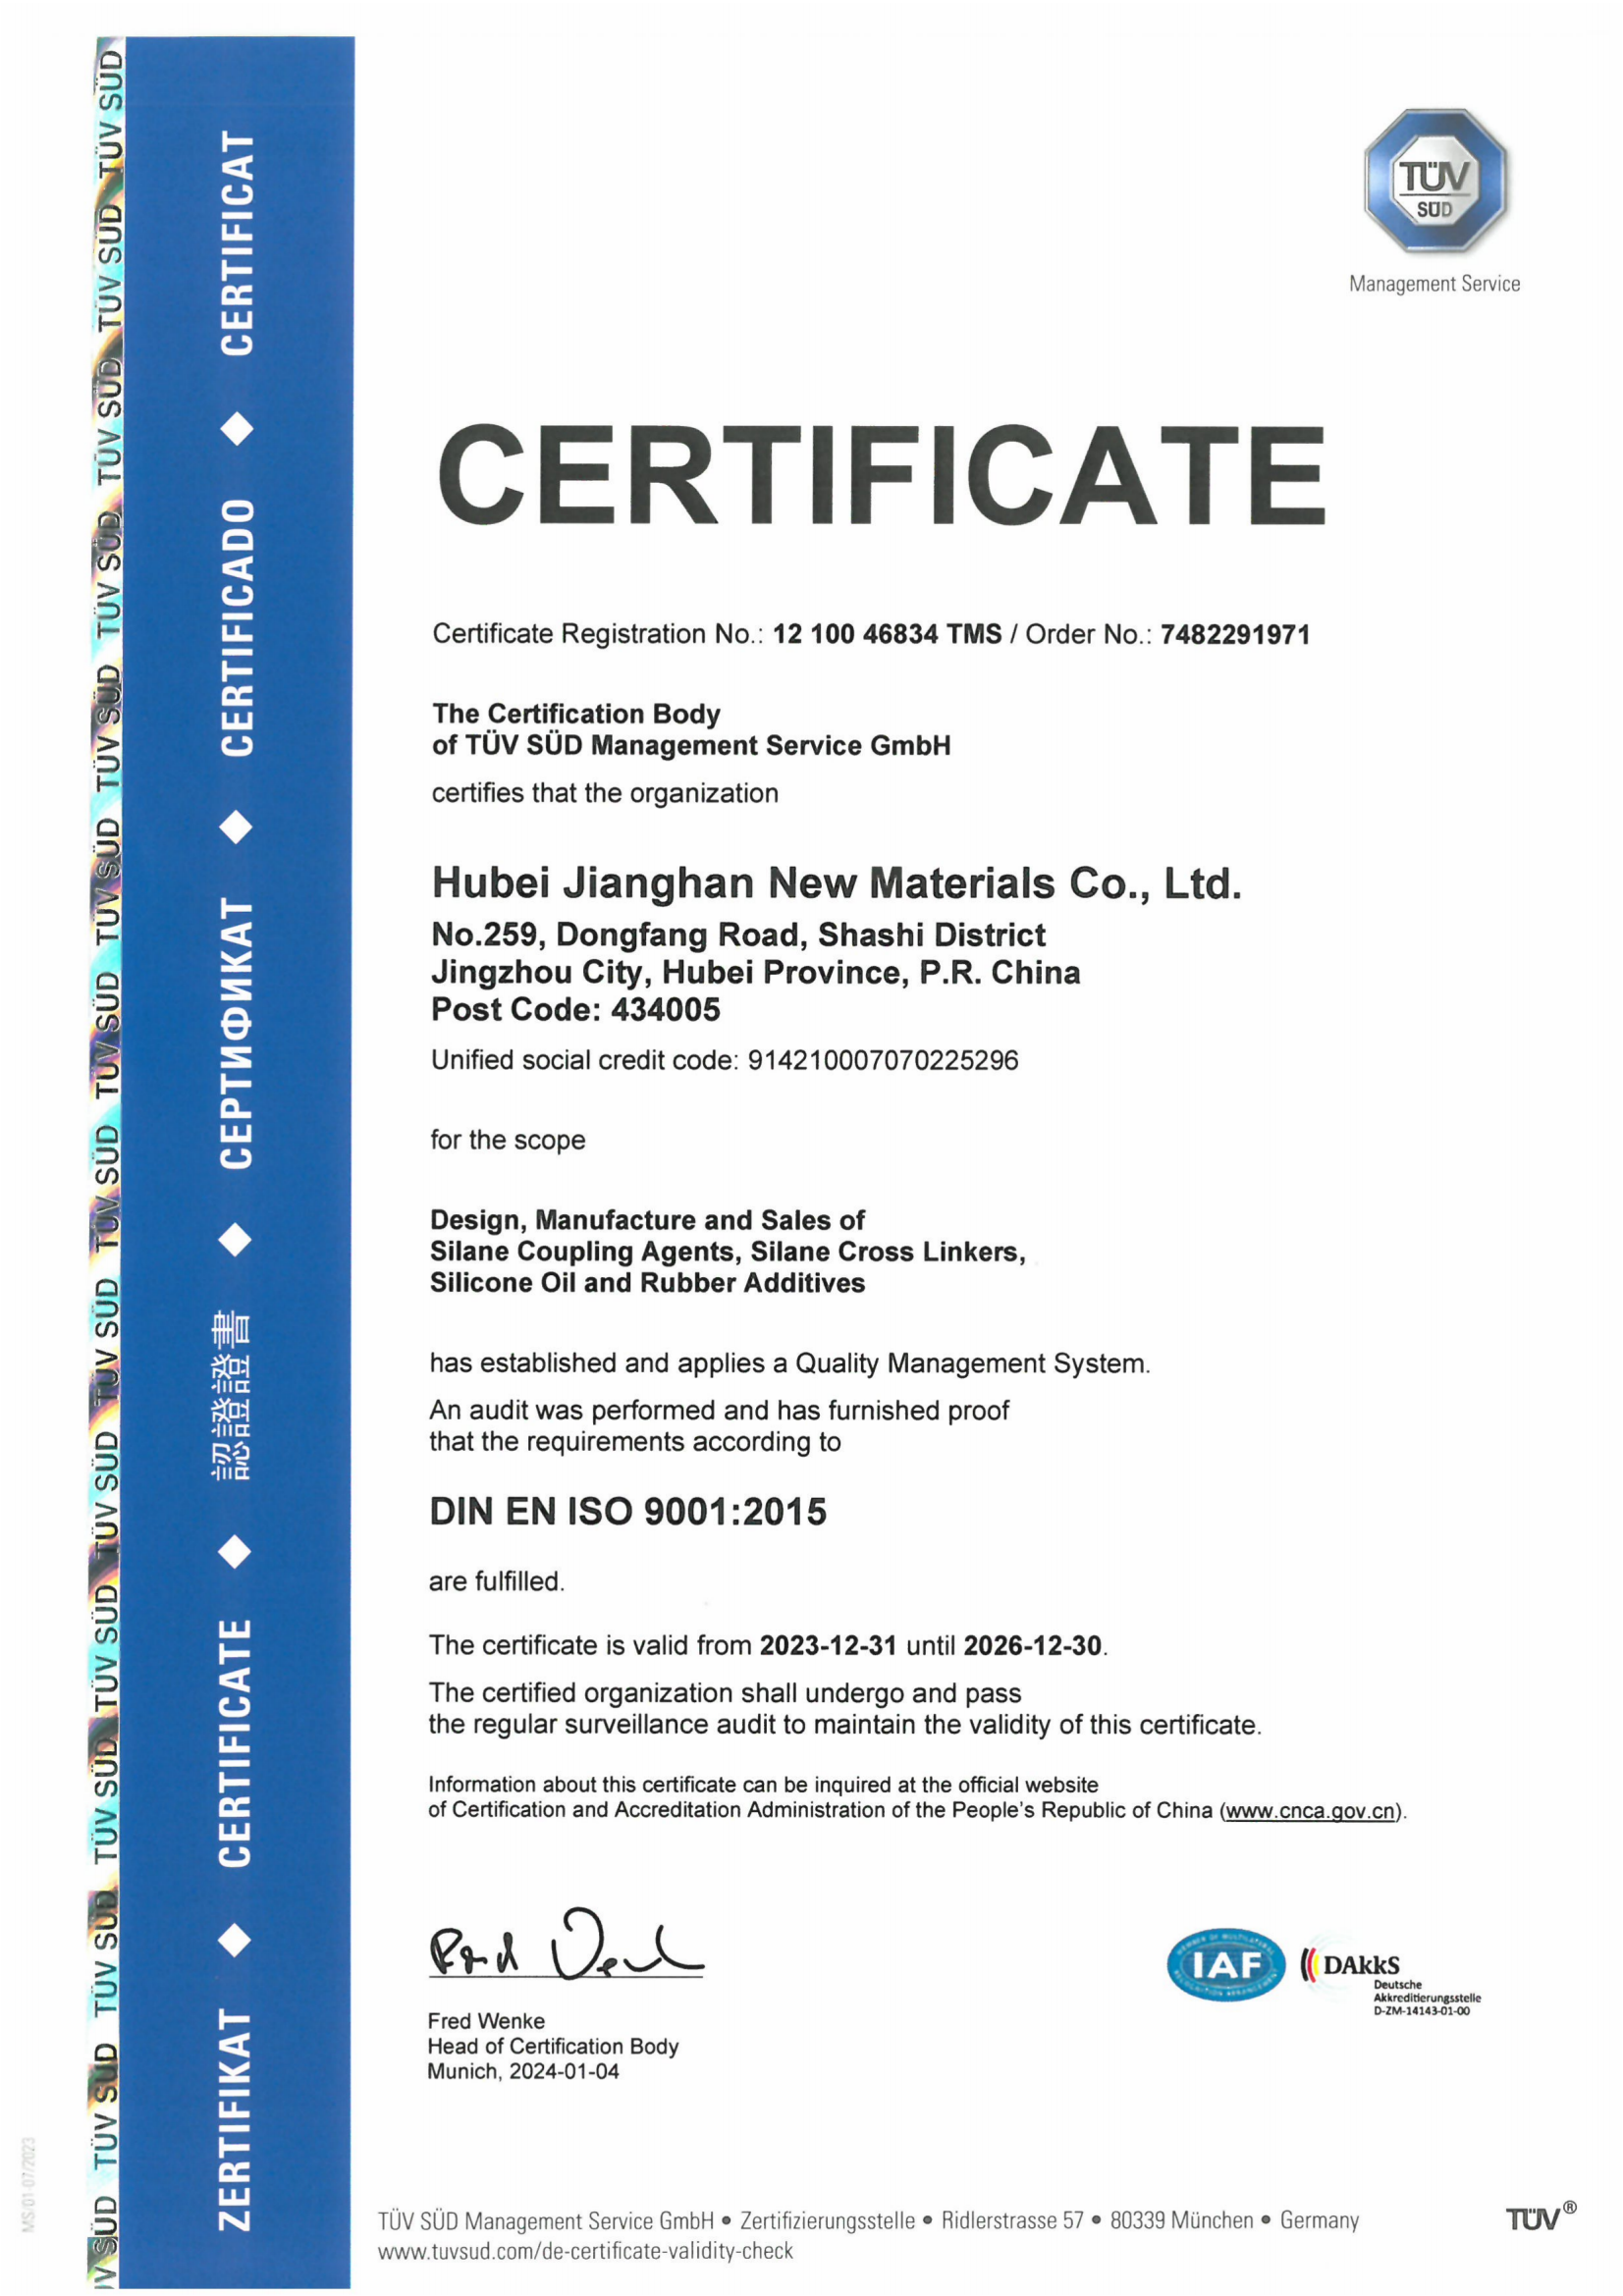 ISO 9001 Quality Management System Certificate